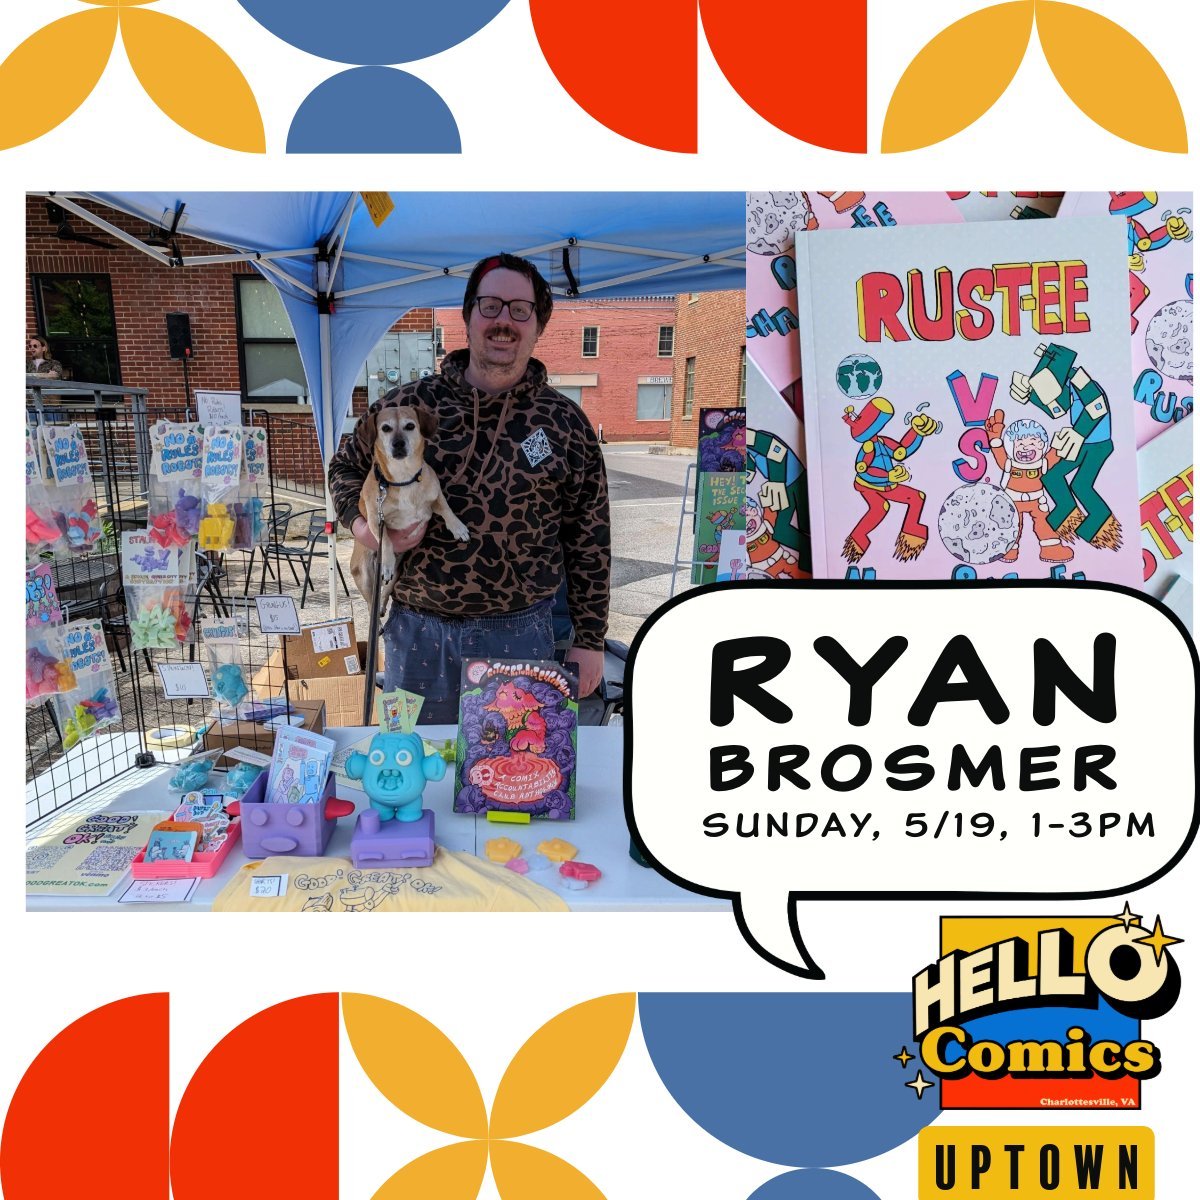 Tomorrow 1pm - Meet Ryan Brosmer! @awfulquiet  He's a comic artist, self-publisher, zine crafter, toy maker, and organizer behind the awesome Staunton Underground Comic &amp; Zine Fest @sucz_fest . He's a fixture in the Virginia comics community - so